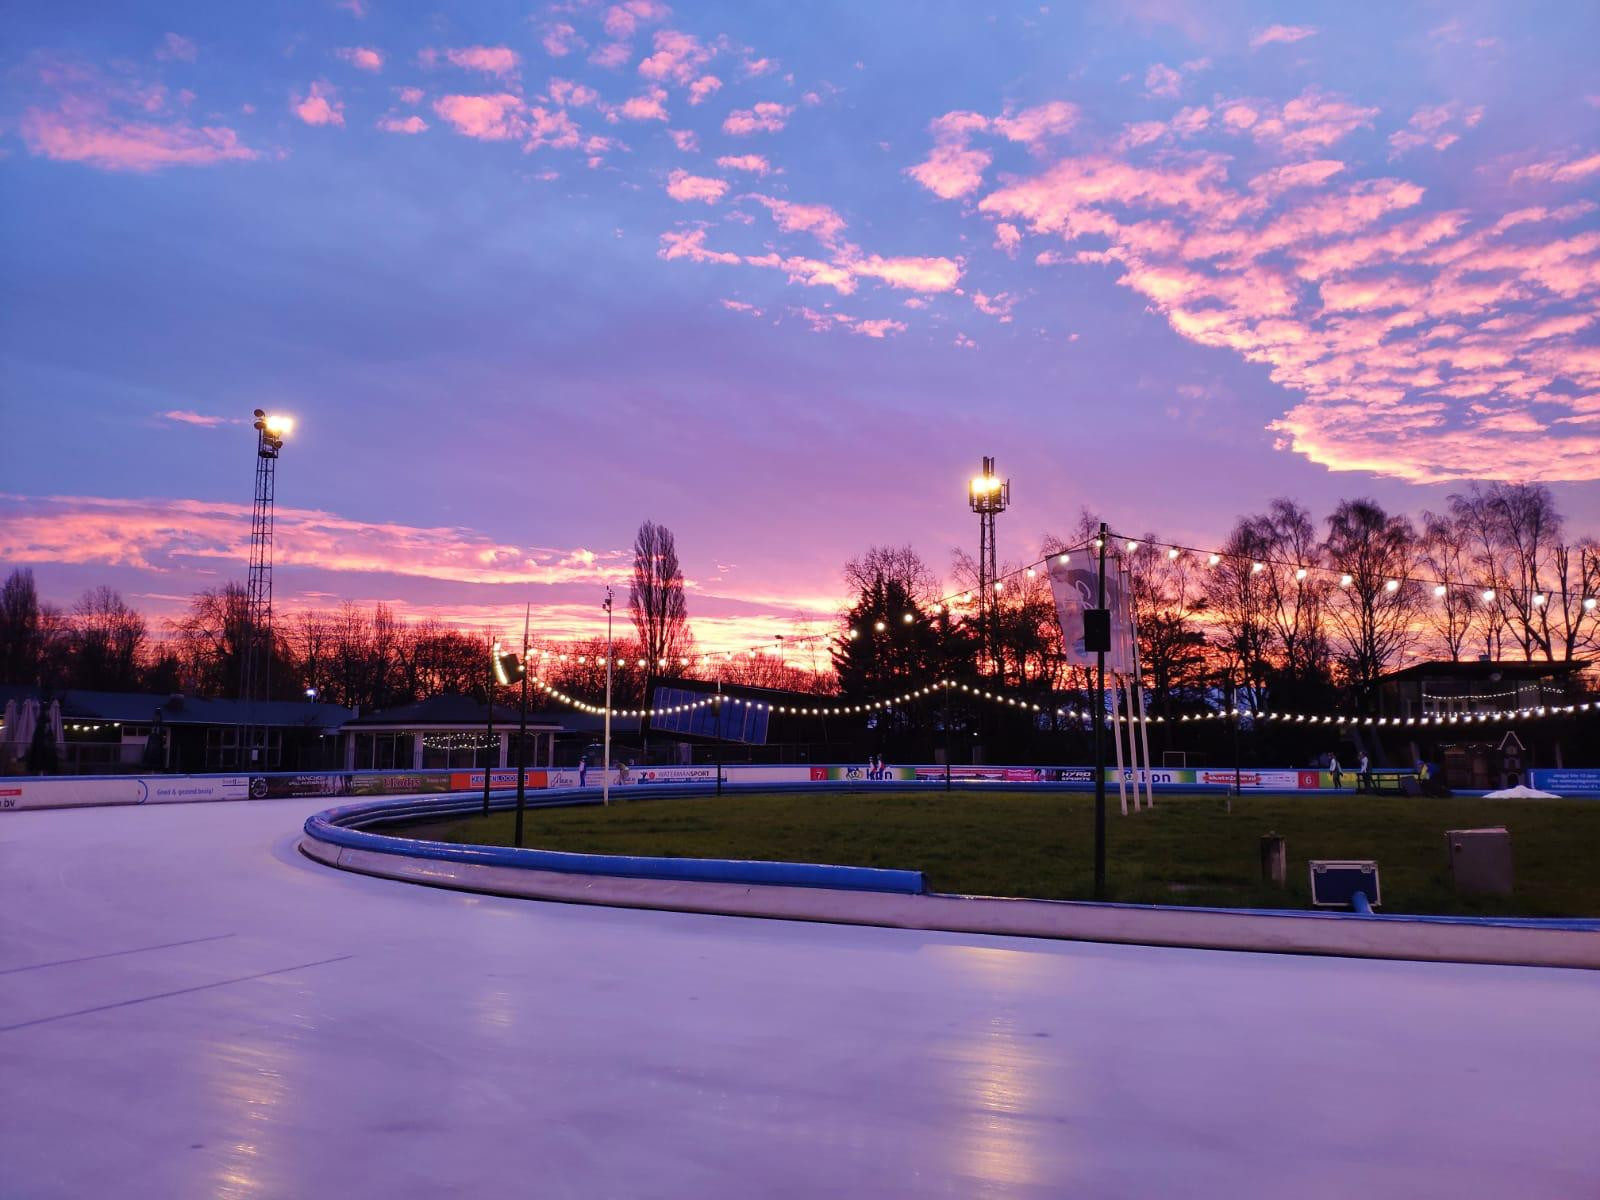 The FISU World University Speed Skating Championships are set to take place at the Jaap Eden ice rink in Amsterdam ©FISU